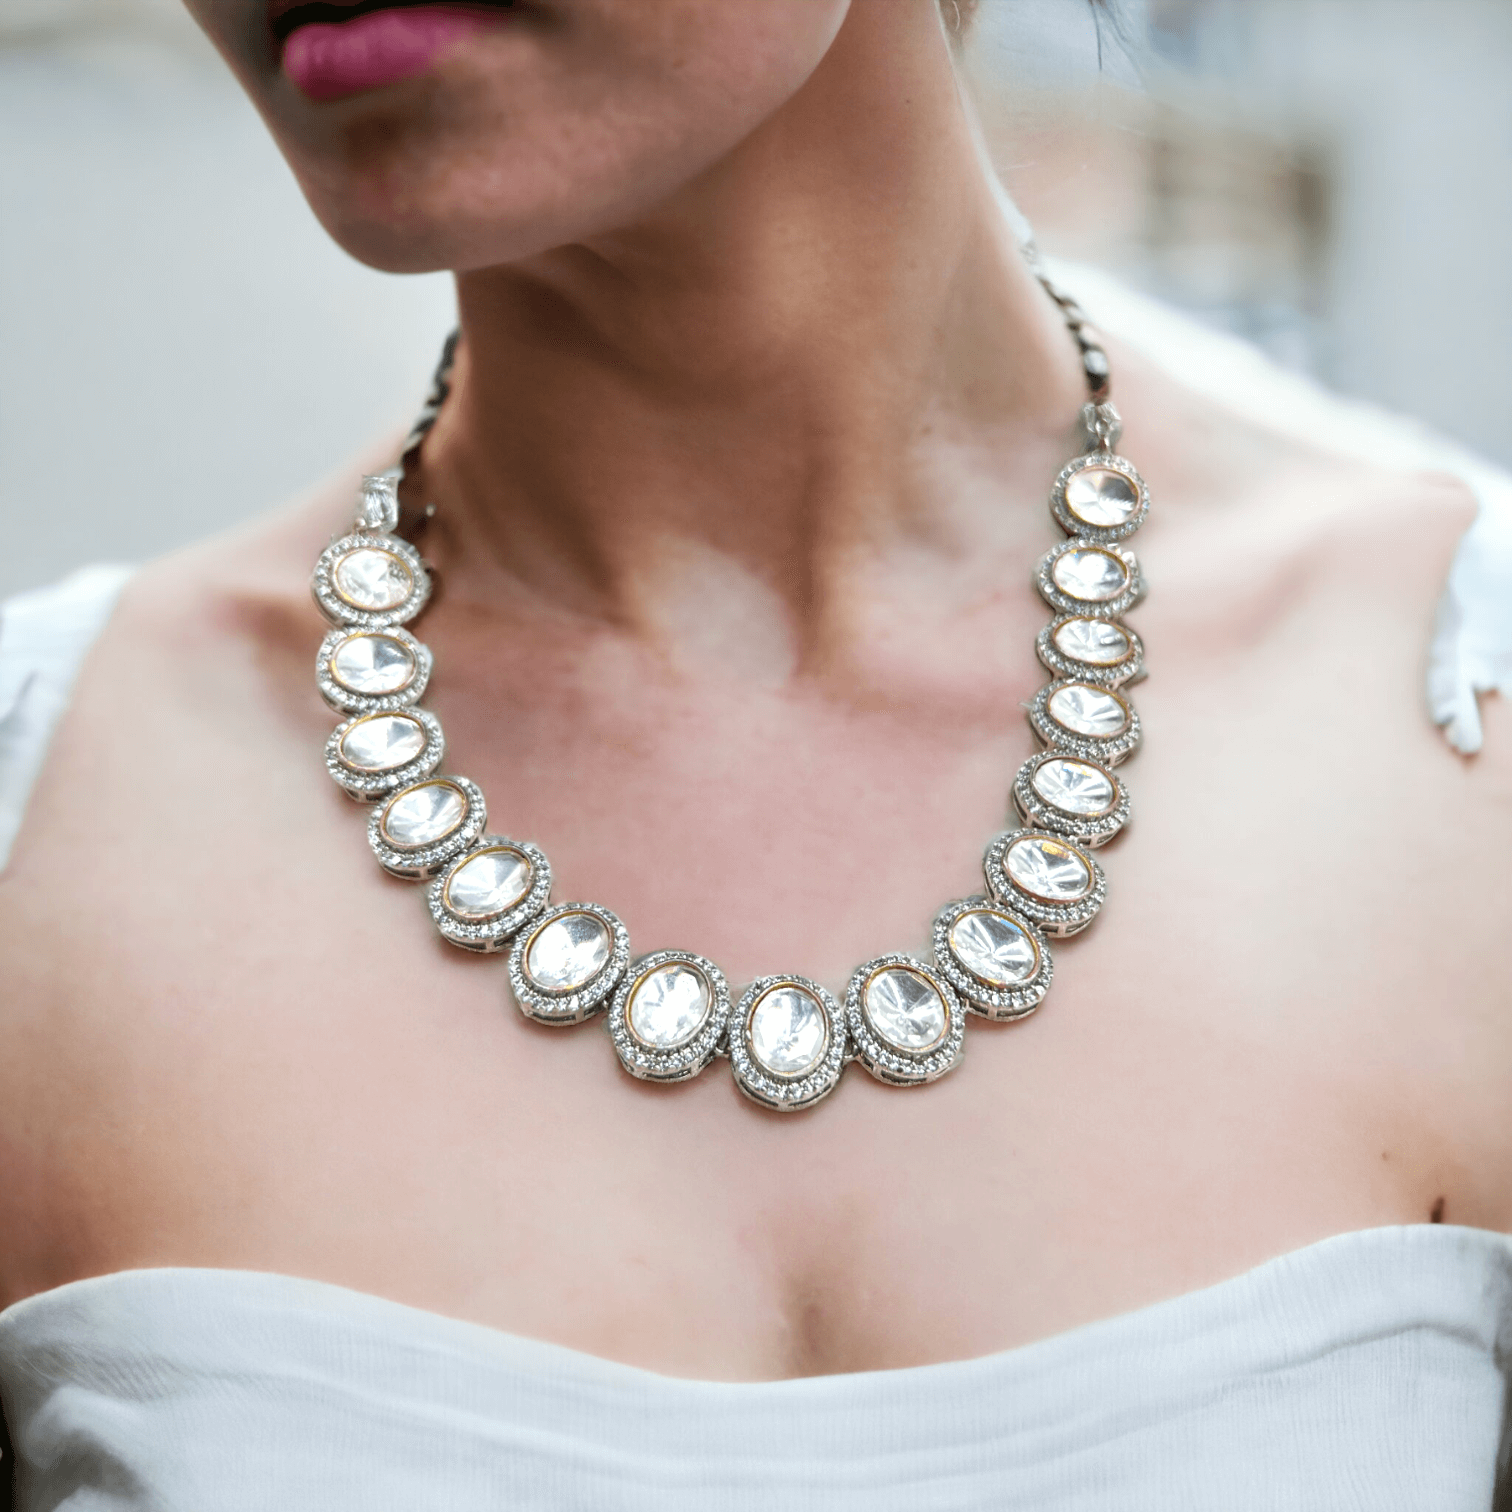 Best Necklaces for Women